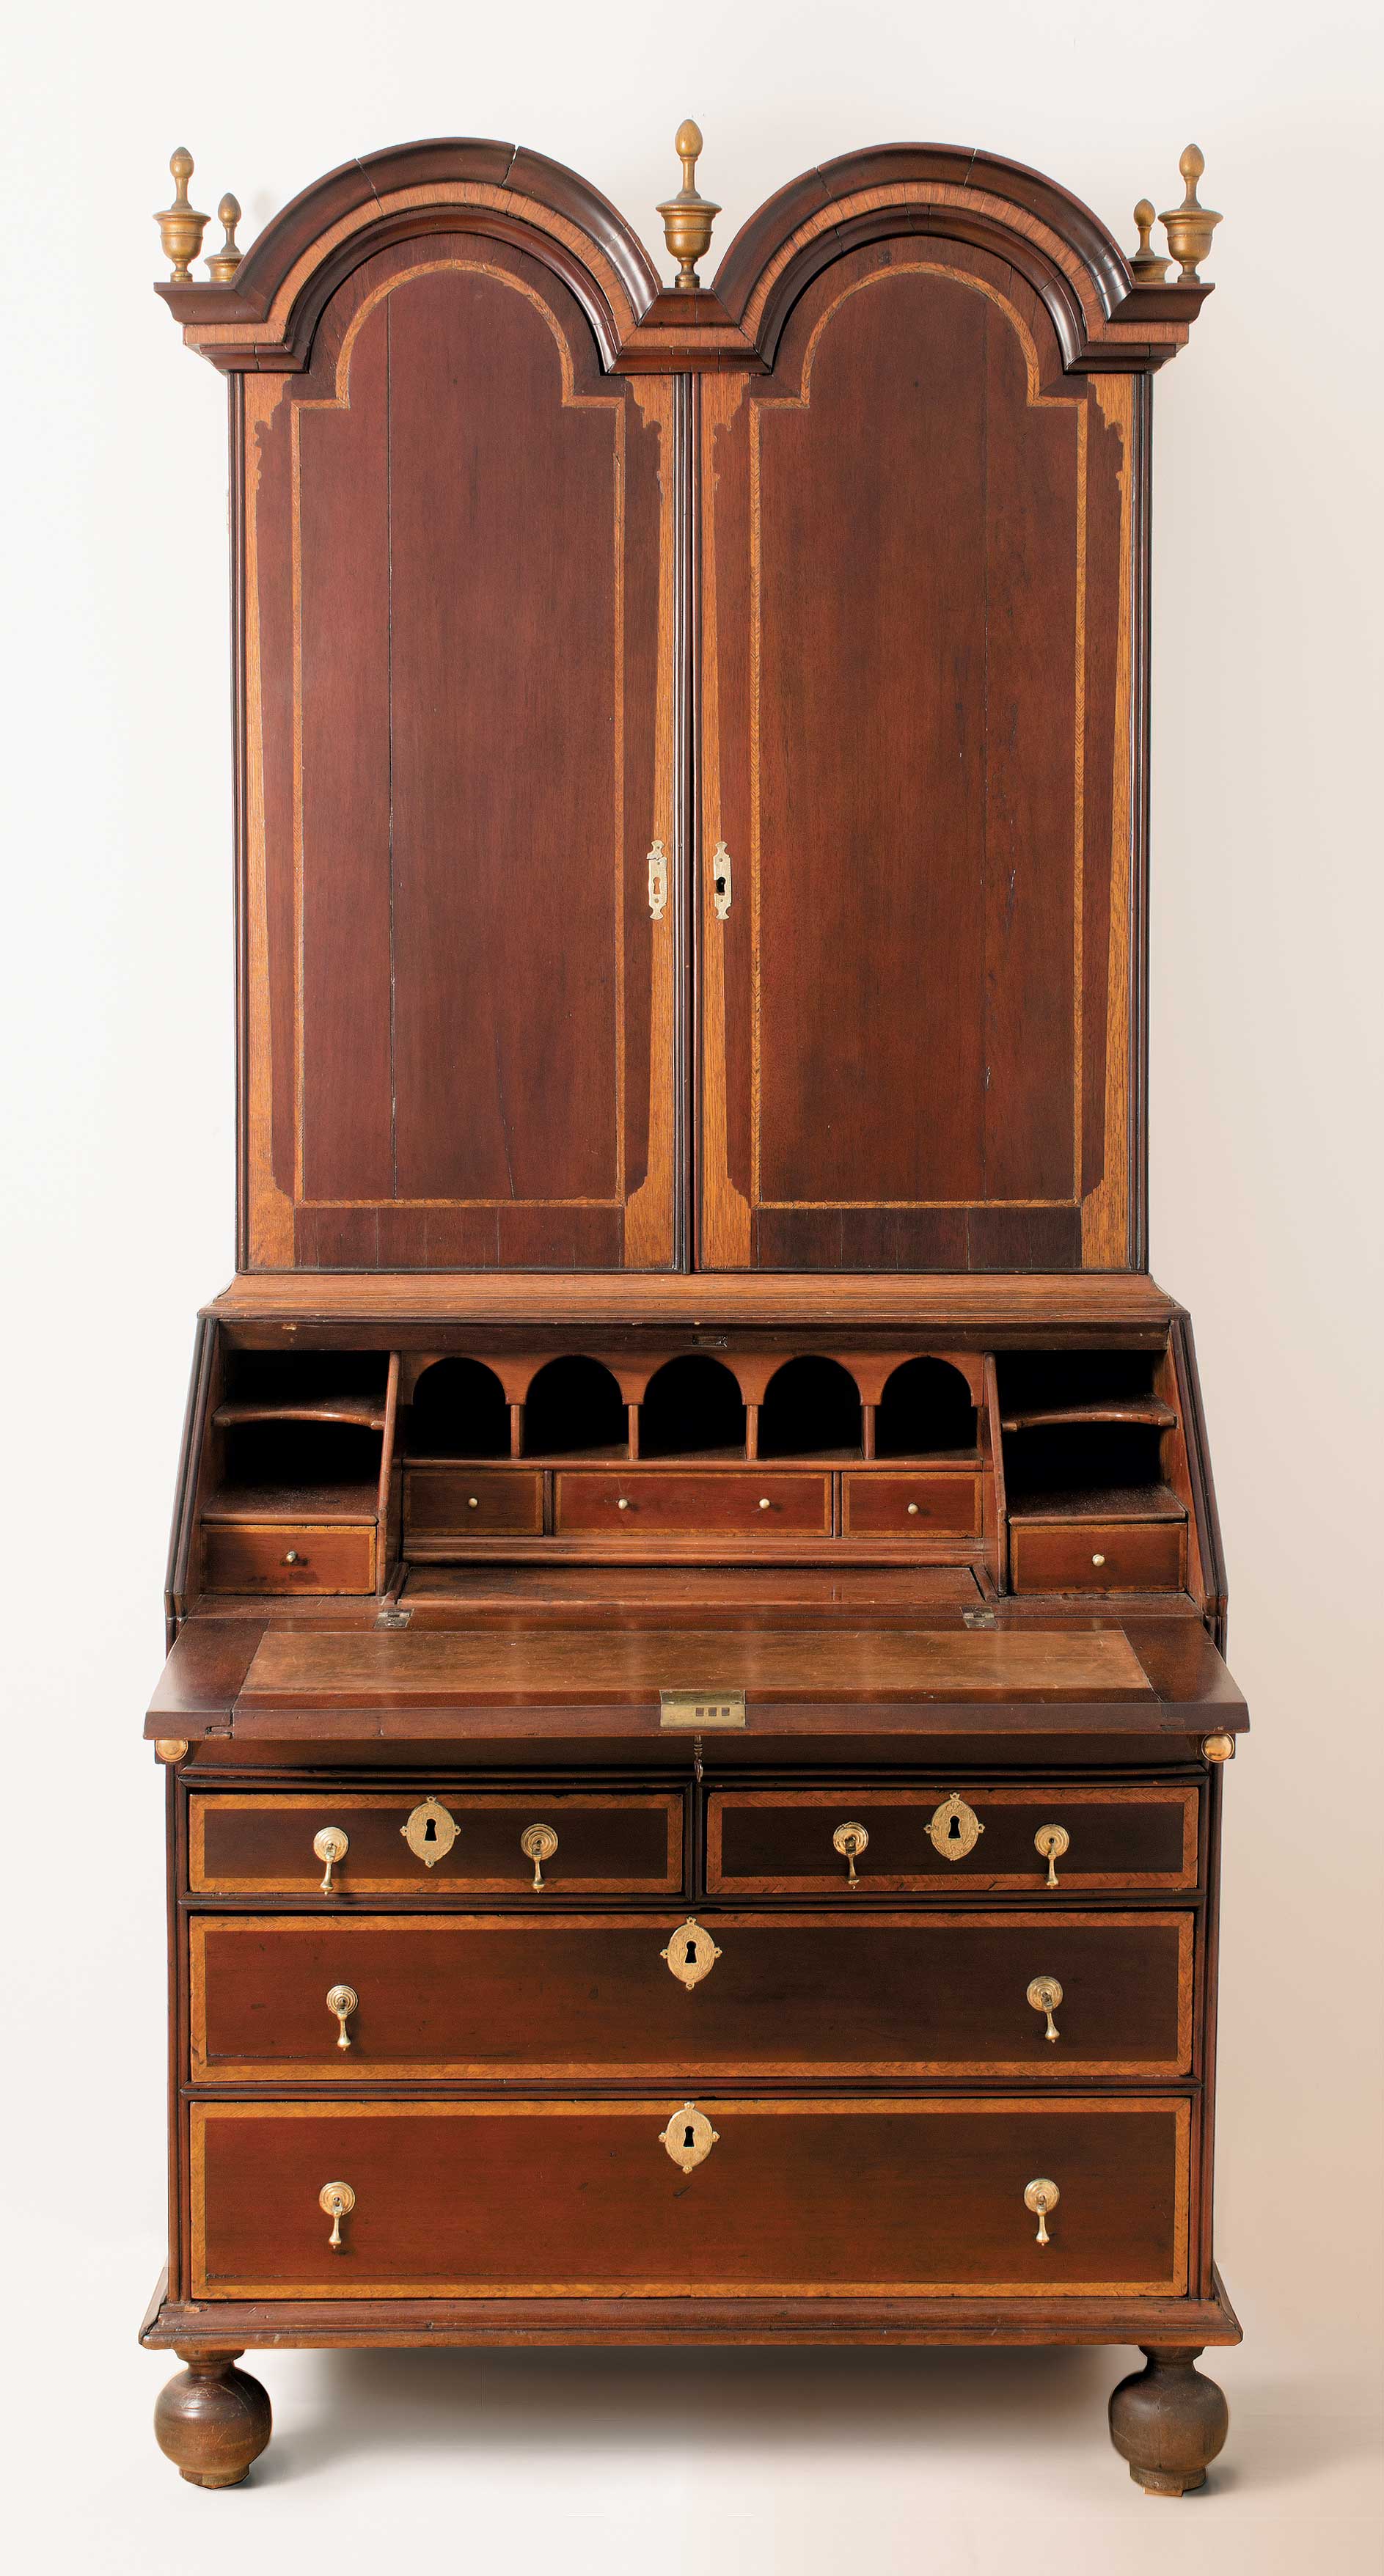 A very rare William and Mary period ball-footed desk/bookcase